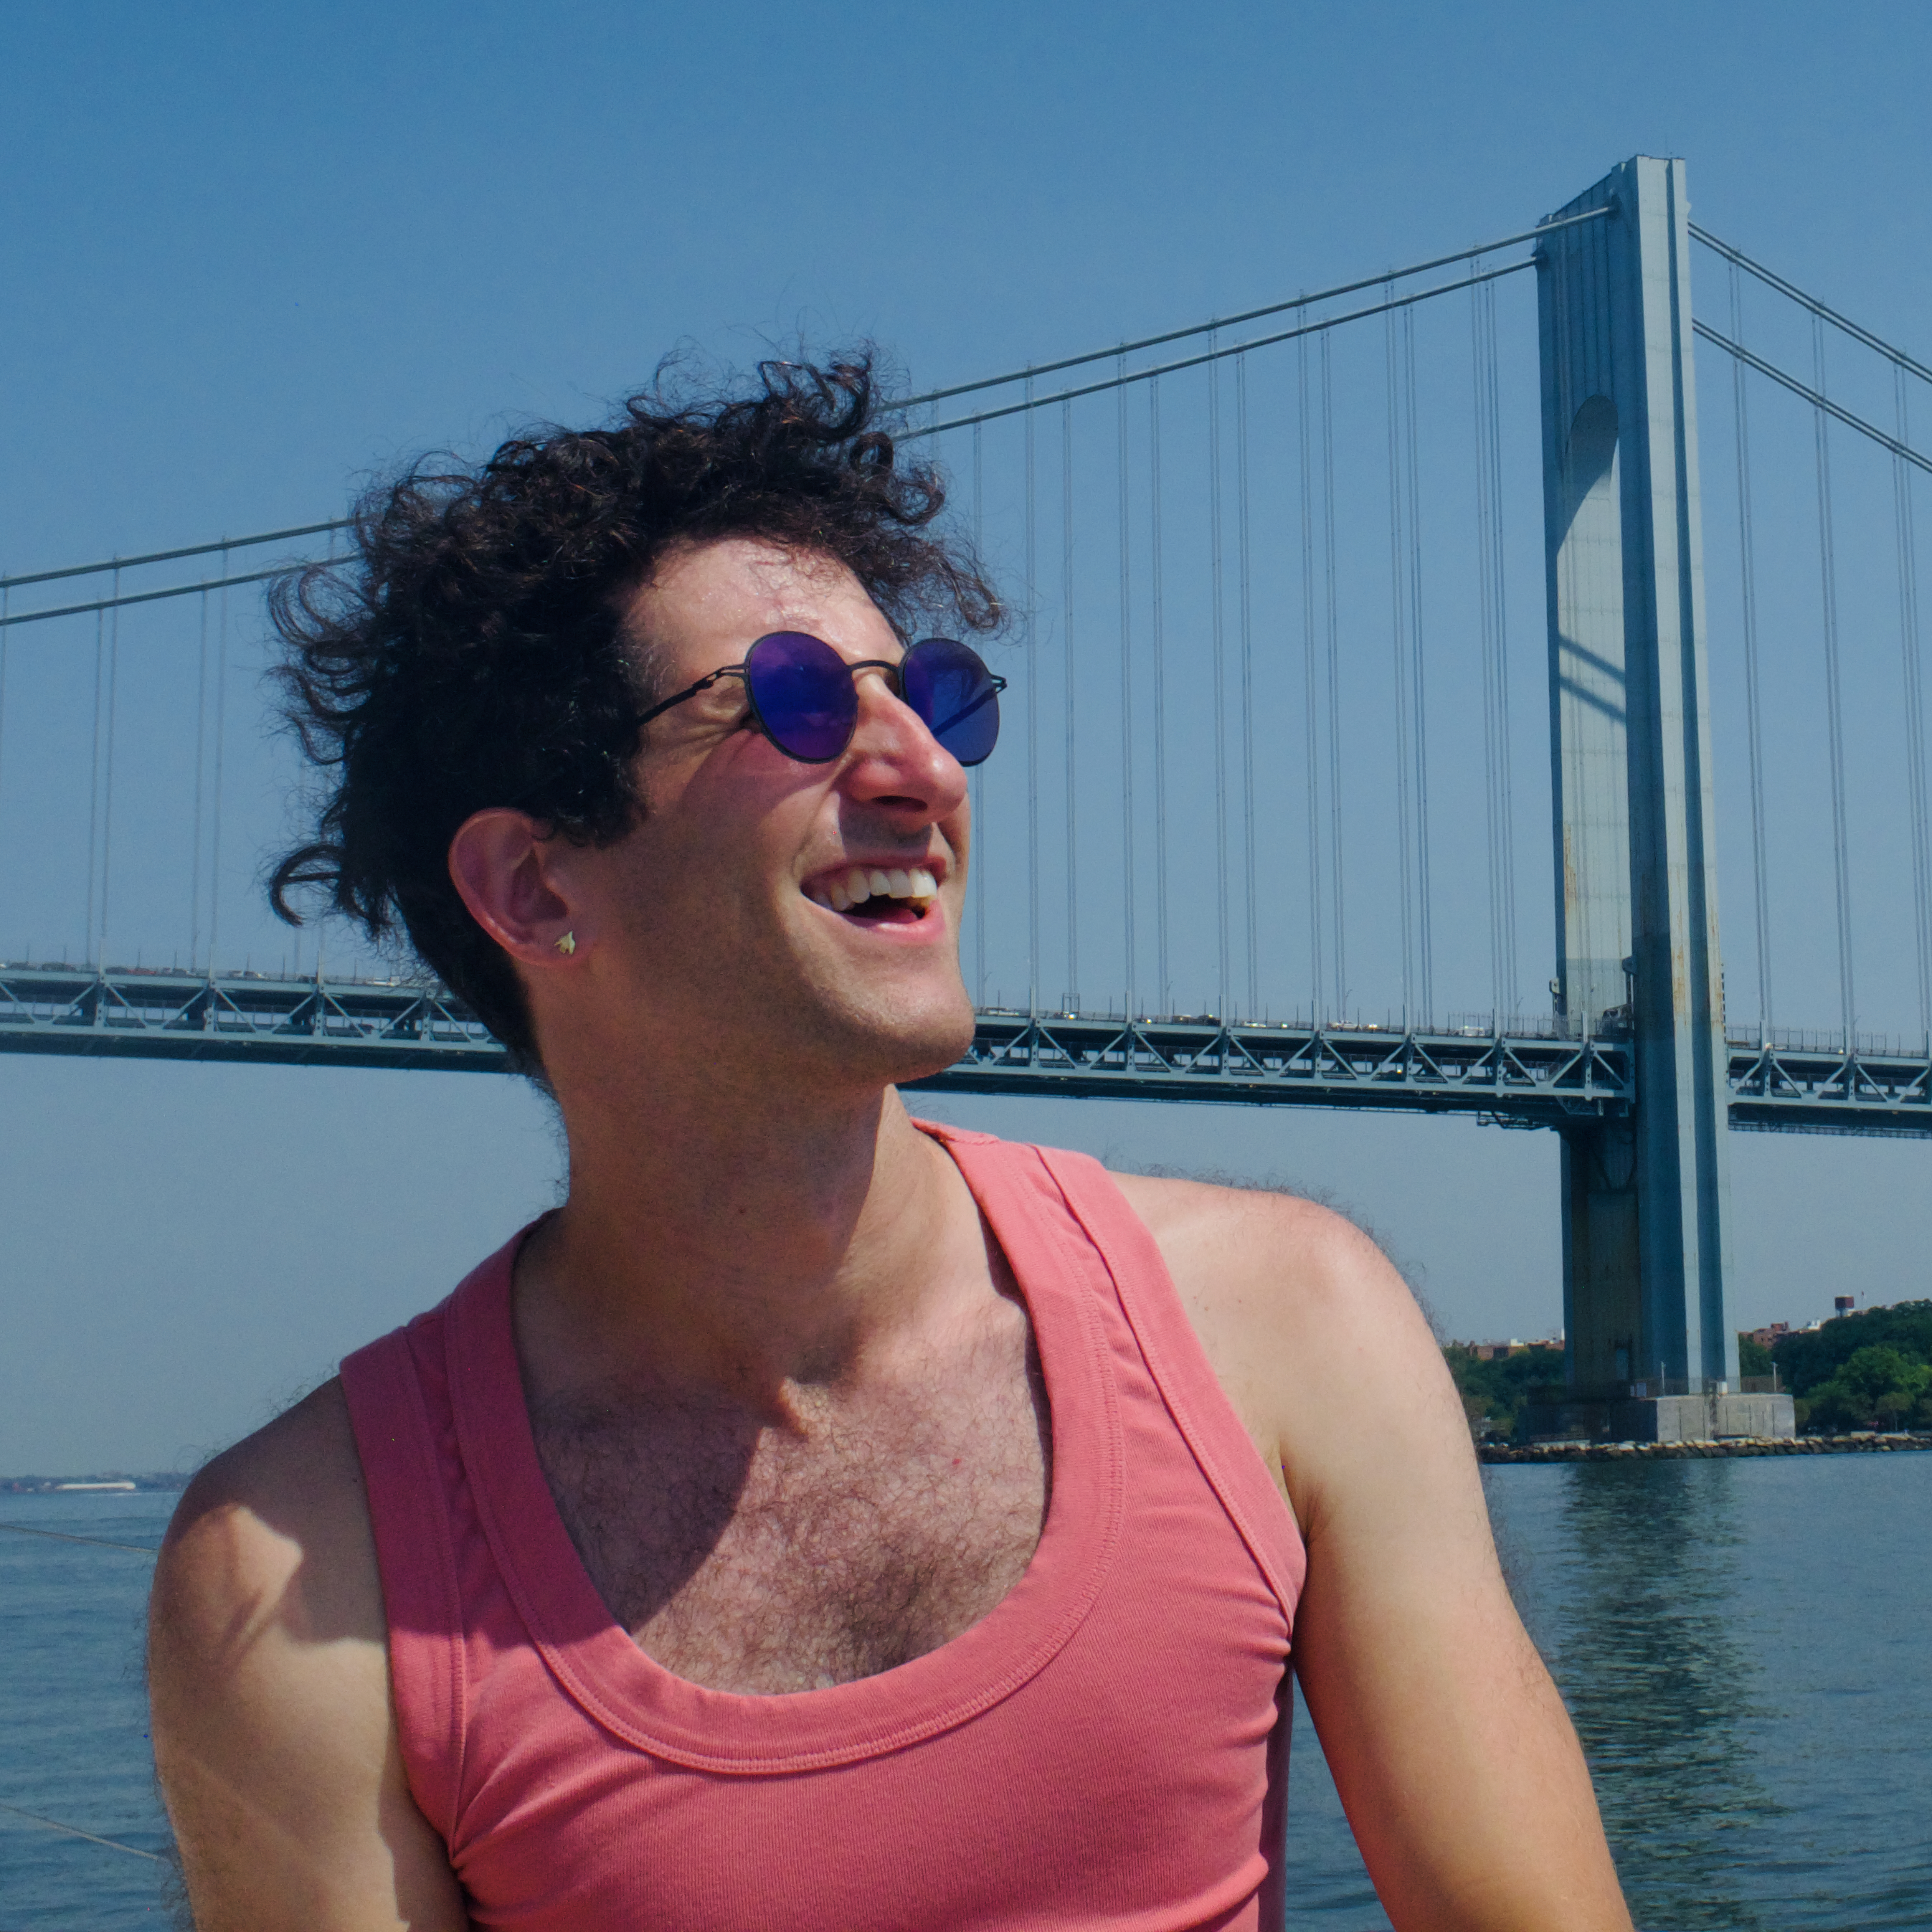 jordan, wearing sunglasses and a salmon colored tank top, posing on a sunny, summer day in front of the Verrazano Bridge